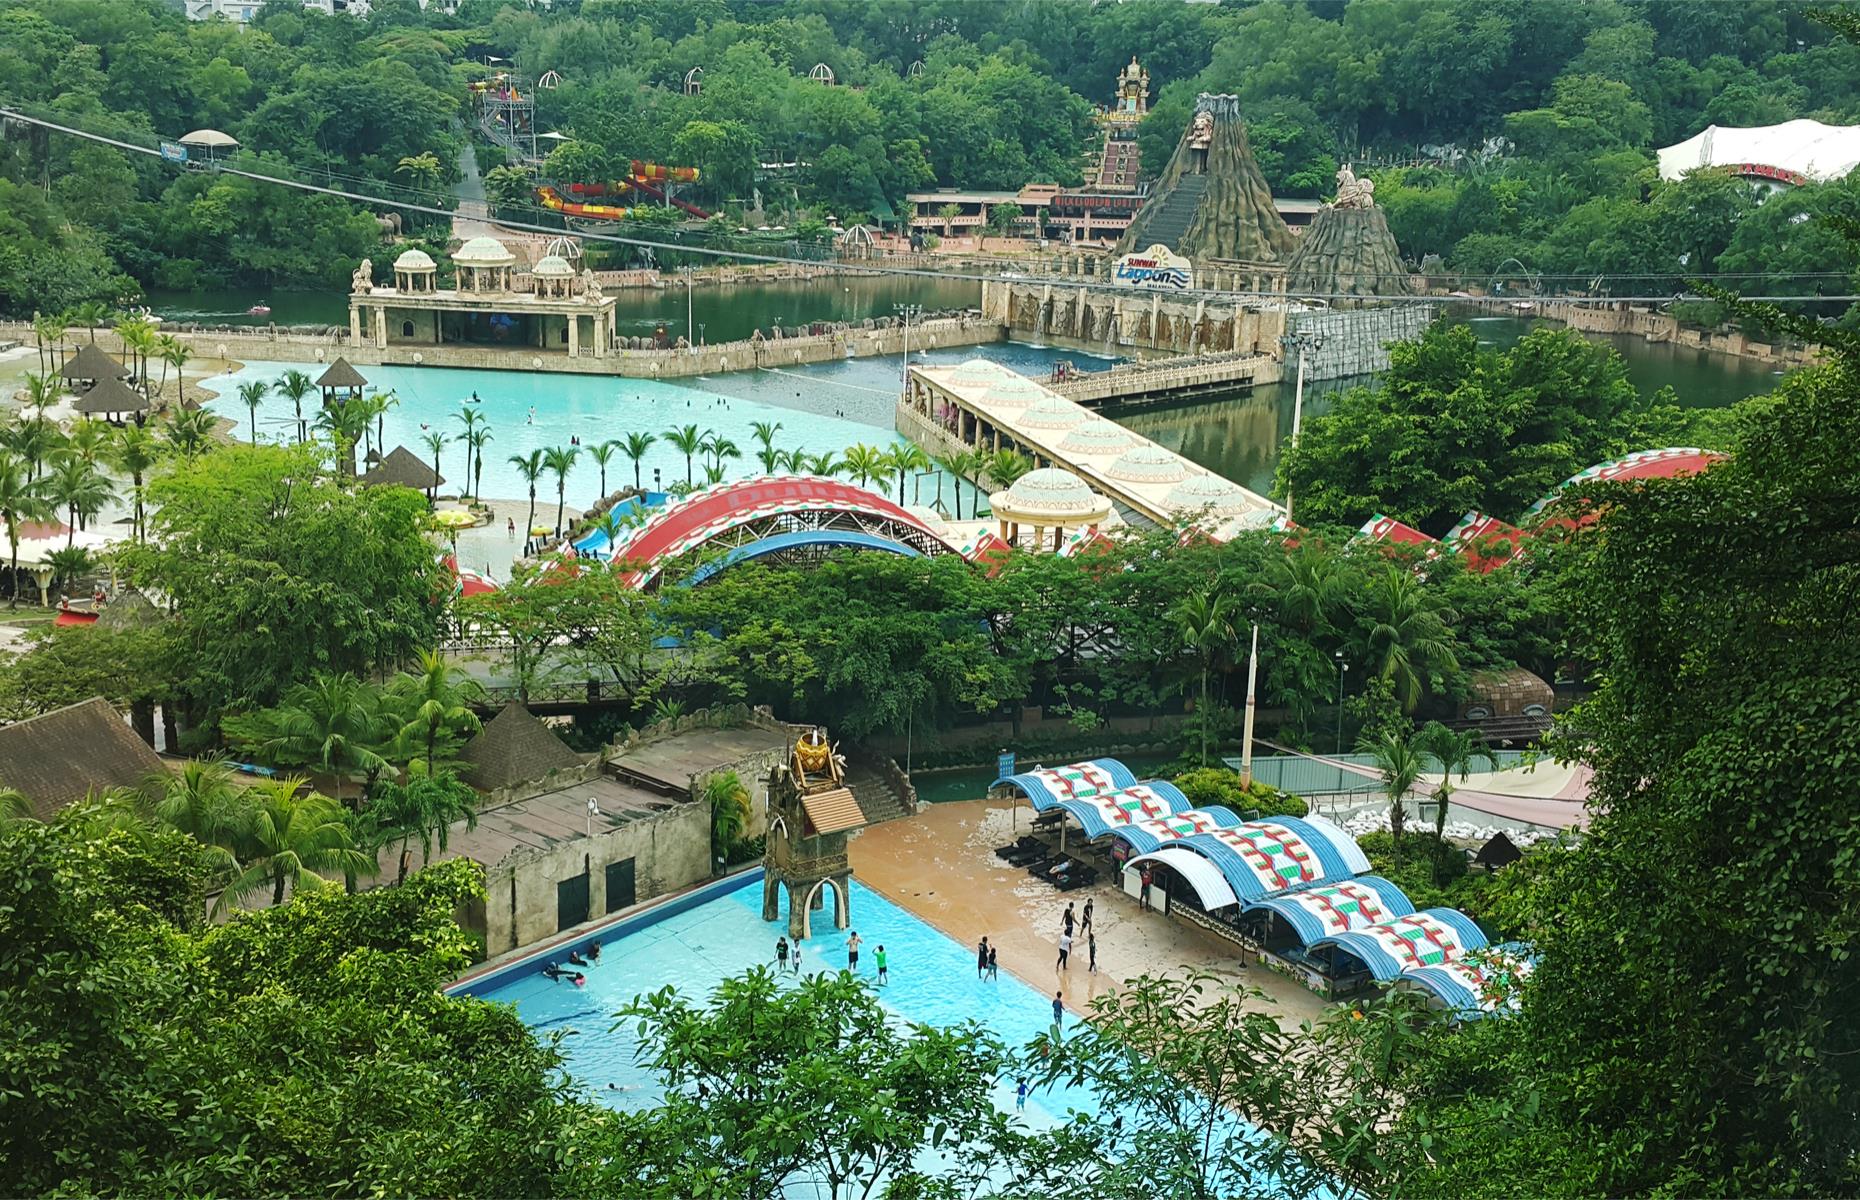 <p>In addition to various scream-fest water rides, there's an enormous man-made surf beach in the water area of <a href="https://sunwaylagoon.com">this mega multi-theme park</a> not far from Kuala Lumpur. After you've leapt about in the waves and taken a turn in the rapids of the mighty Zambezi river, dare to take on the Vuvuzela. It's the park's most thrilling slide and Malaysia's largest.  </p>